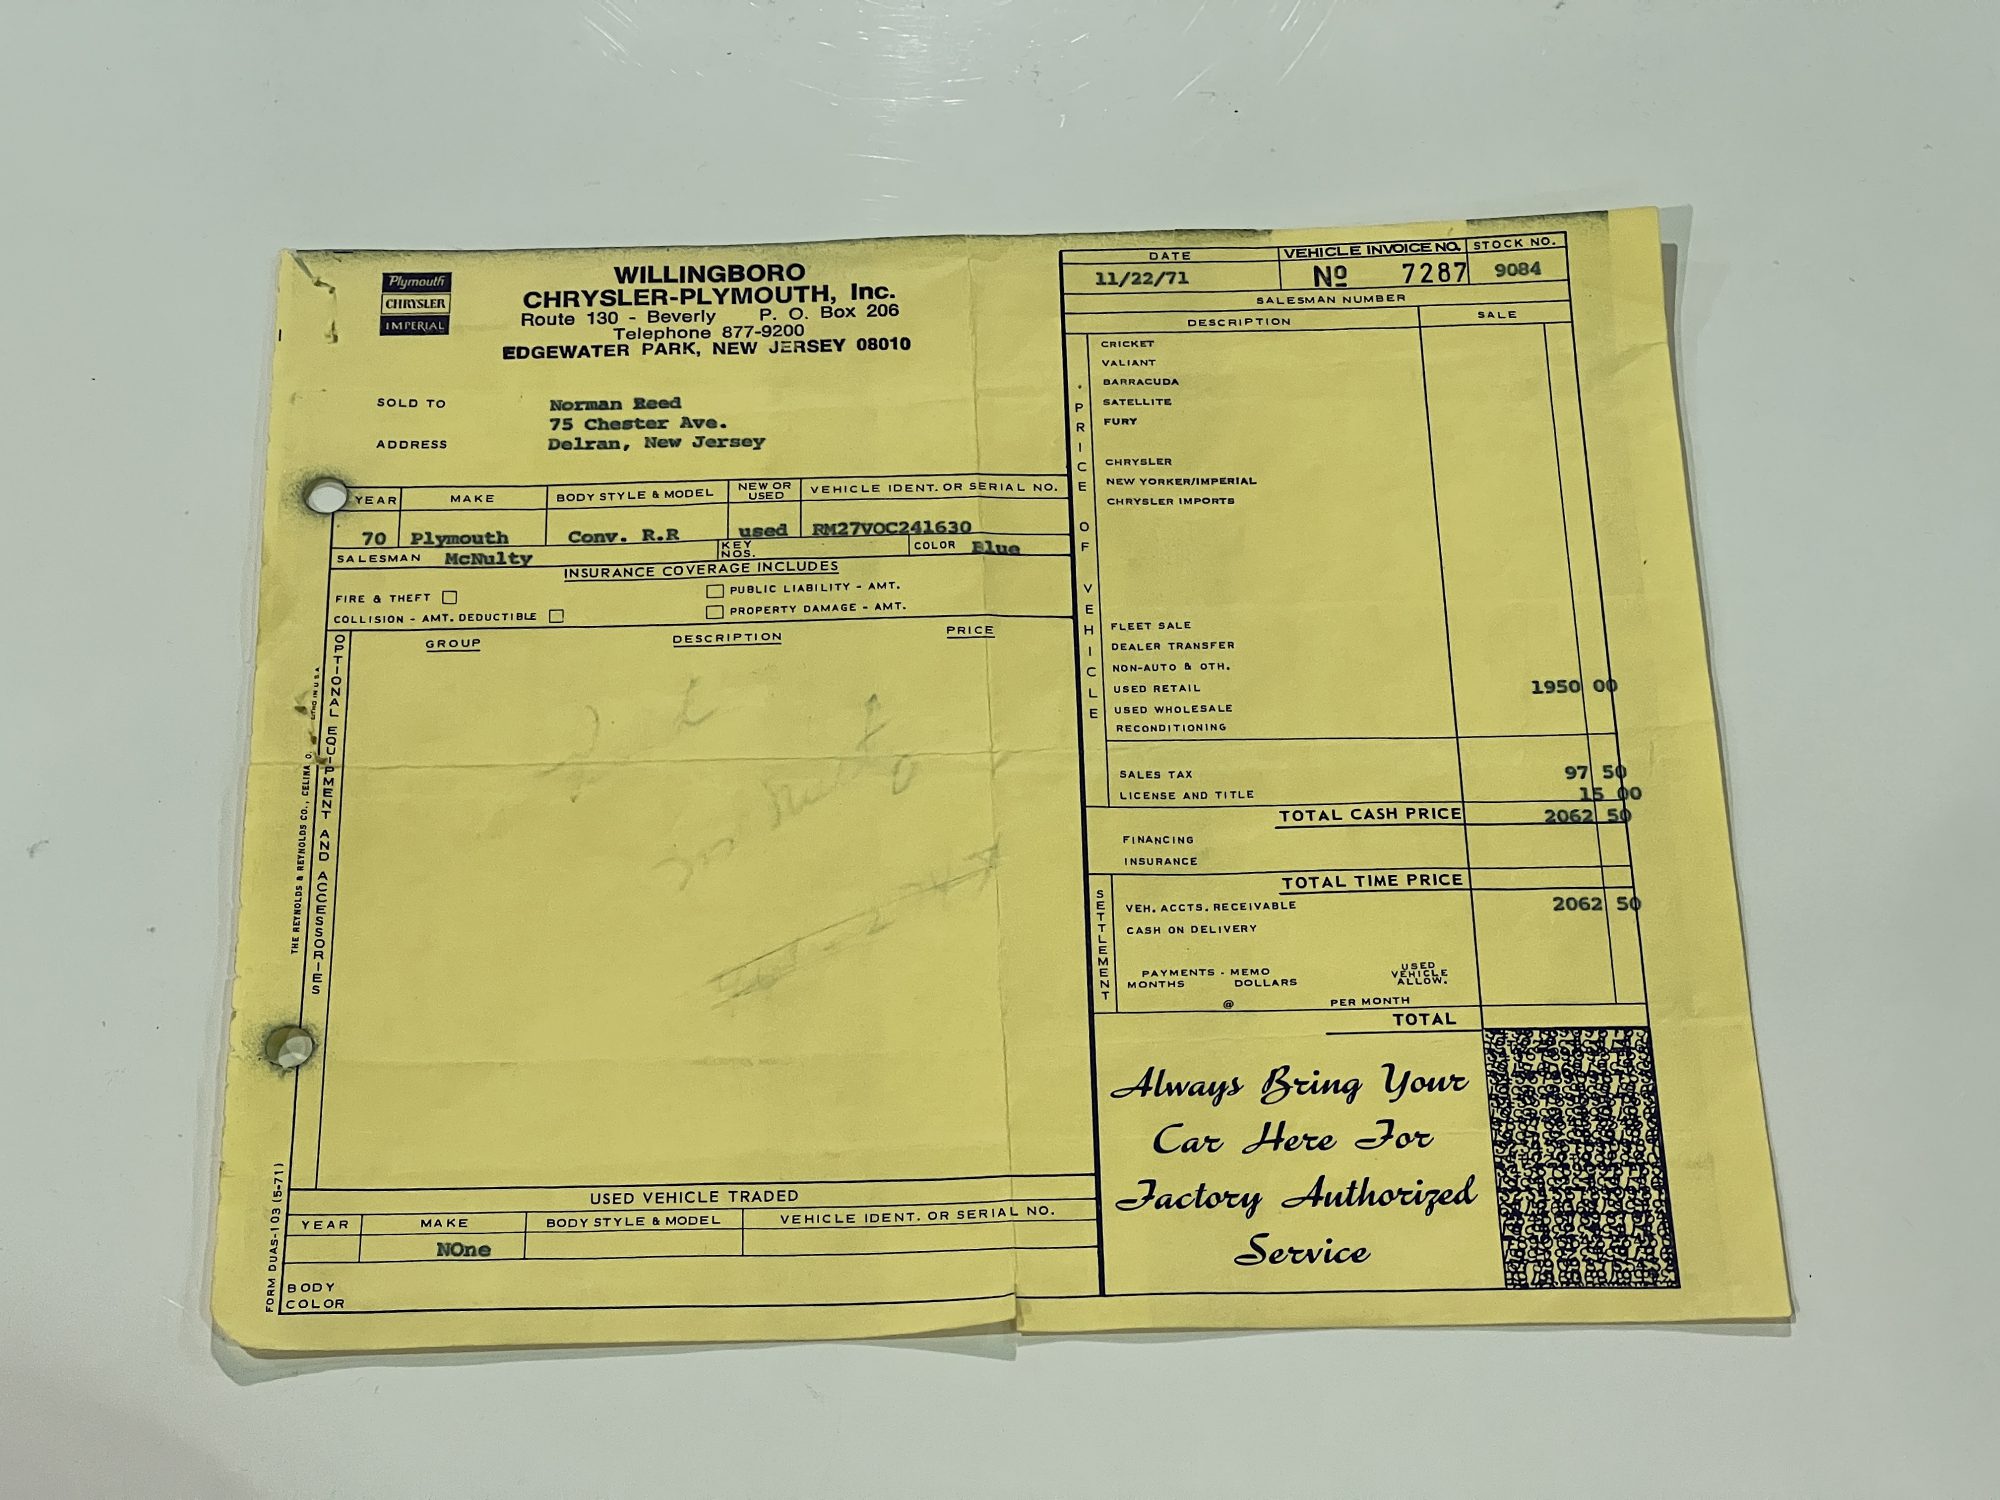 original receipt of purchase of vehicle